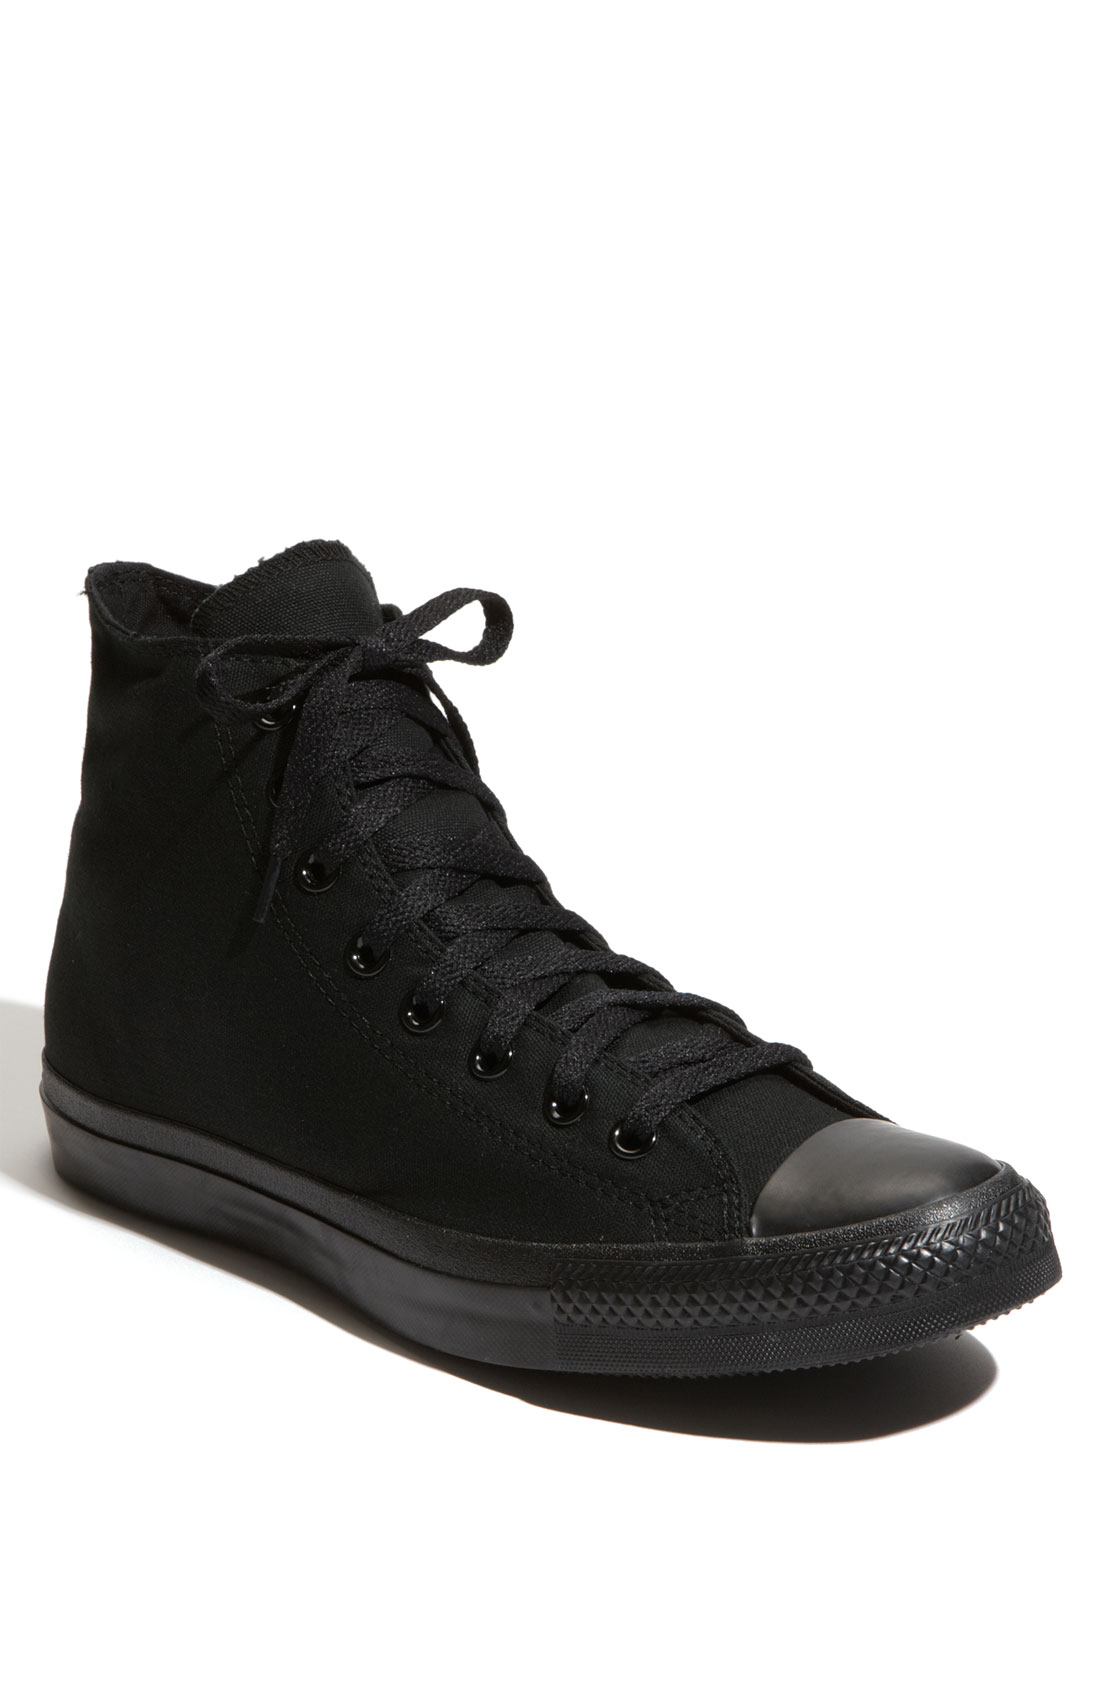 Converse Chuck Taylor® All Star® High Top Sneaker in Black for Men ...